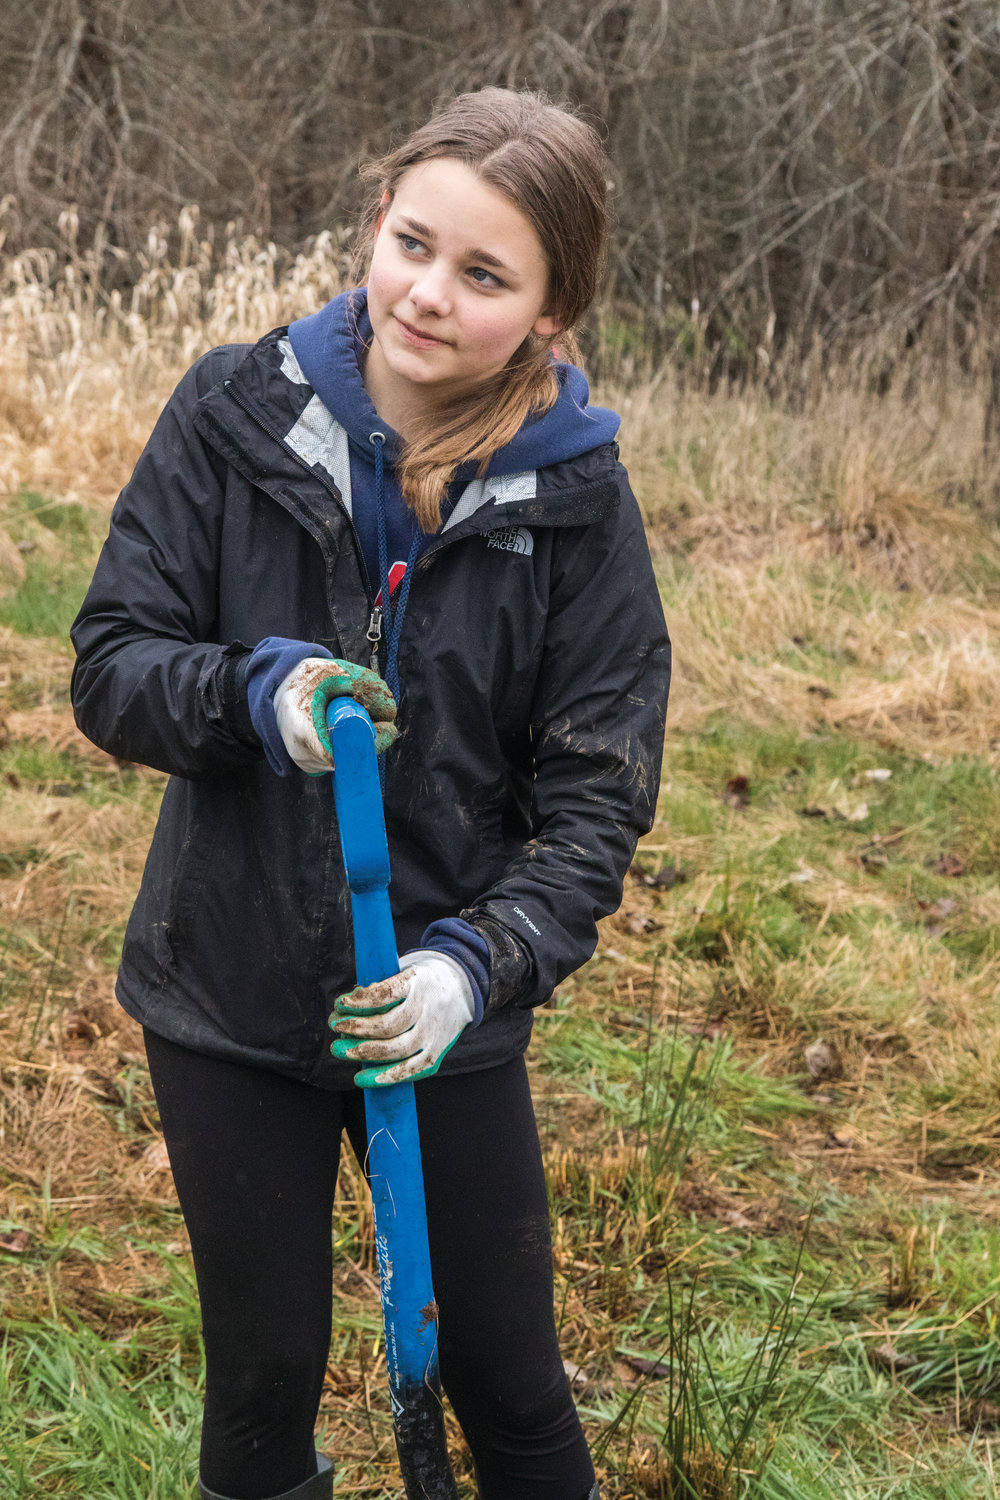 Meg Hoffman says she didn’t expect planting trees to be so fun. “Now that we’re actually doing it, it is fun,” she said. “So that was a good surprise.”